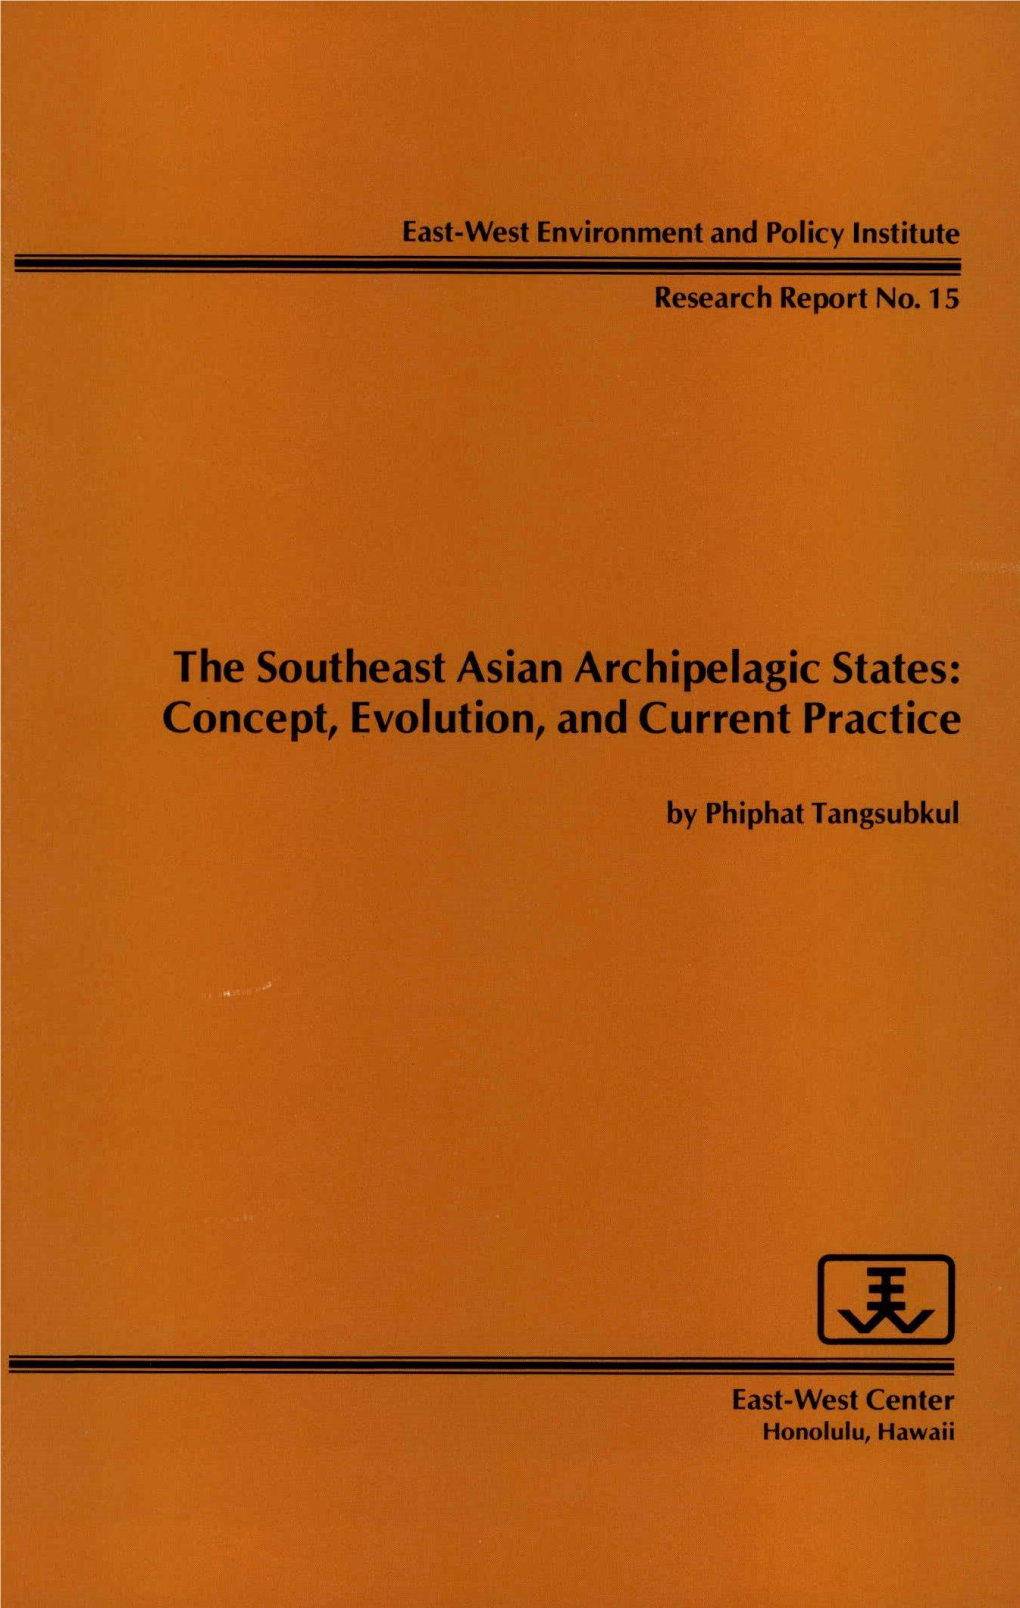 The Southeast Asian Archipelagic States: Concept, Evolution, and Current Practice